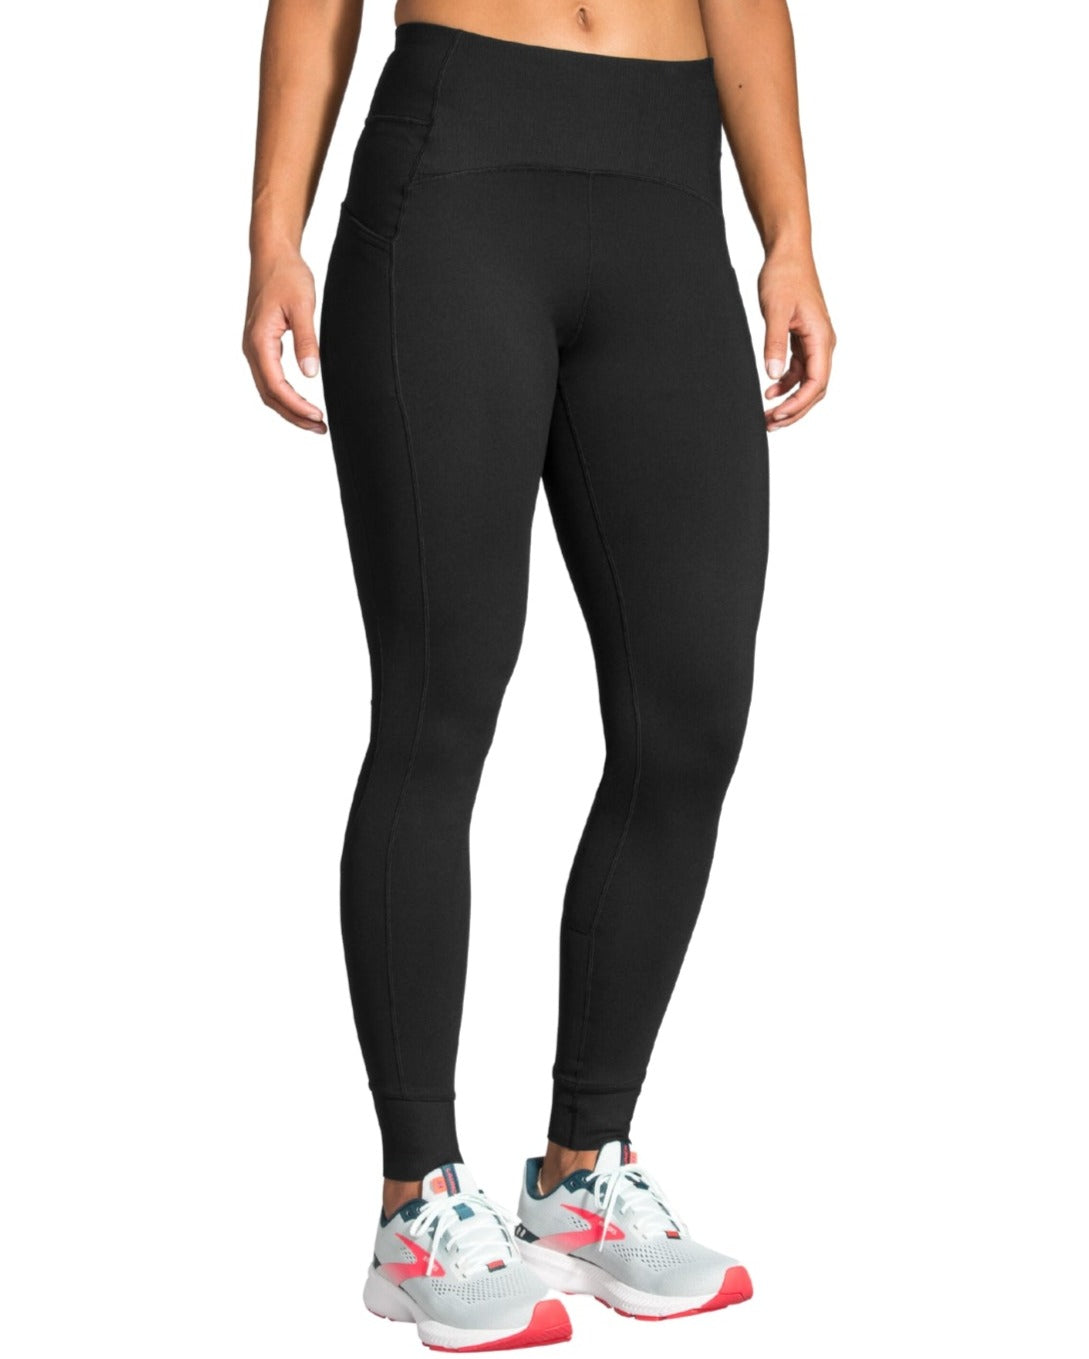 c9 by champion Comfort Athletic Leggings for Women